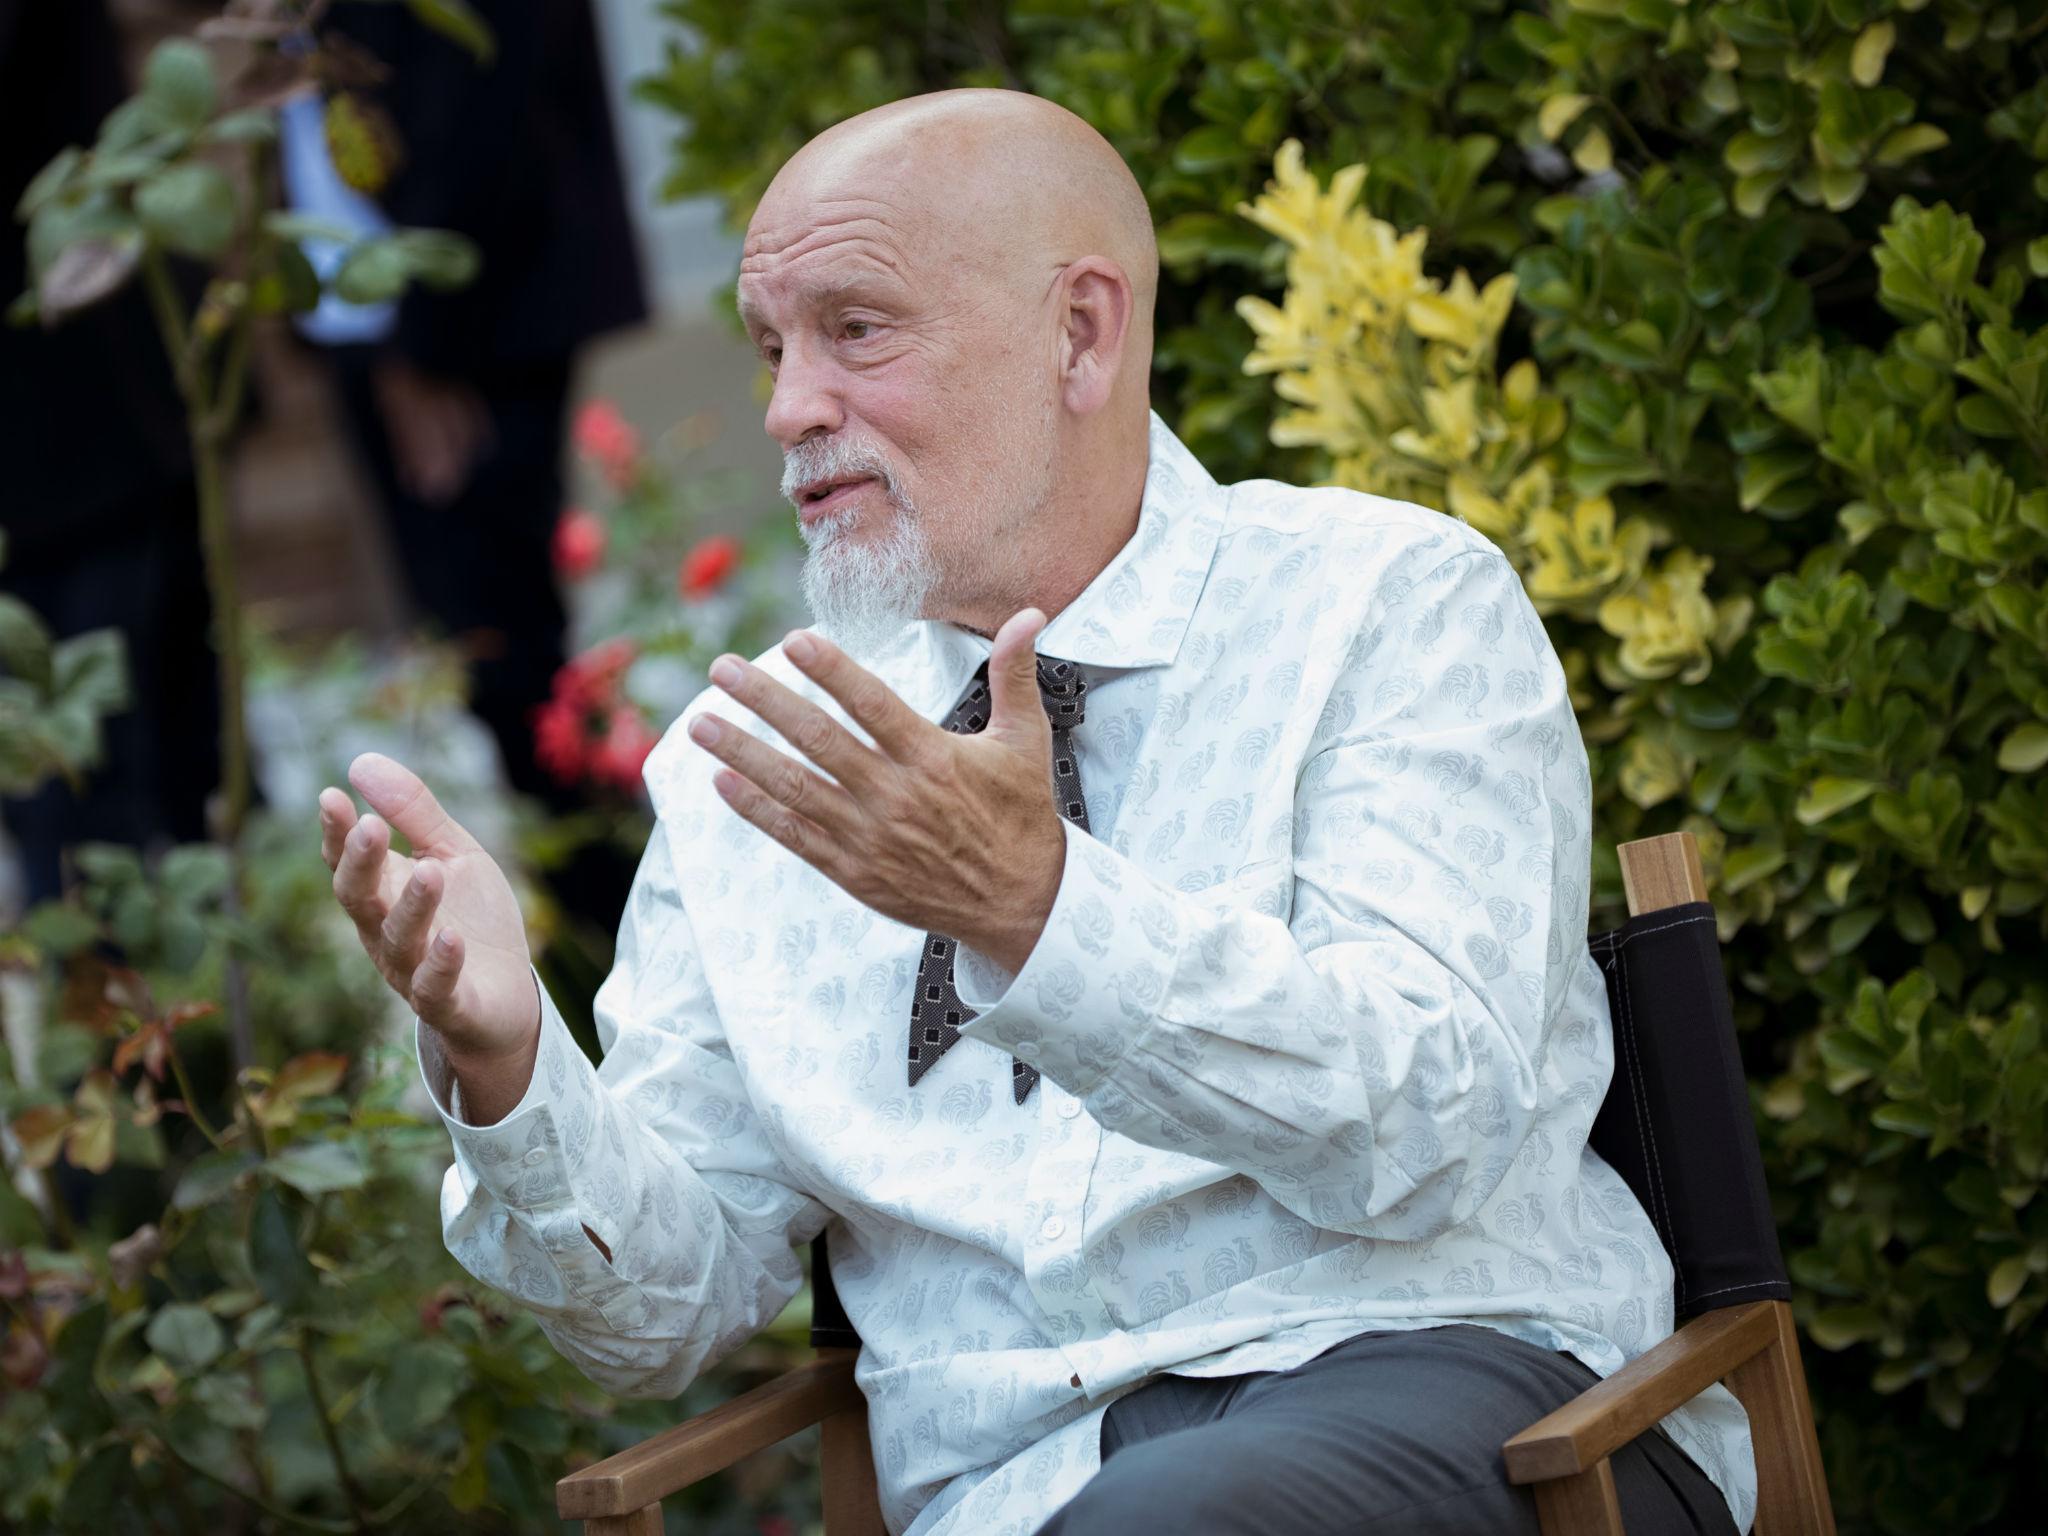 https://static.independent.co.uk/s3fs-public/thumbnails/image/2018/02/28/15/malkovich-5.jpg